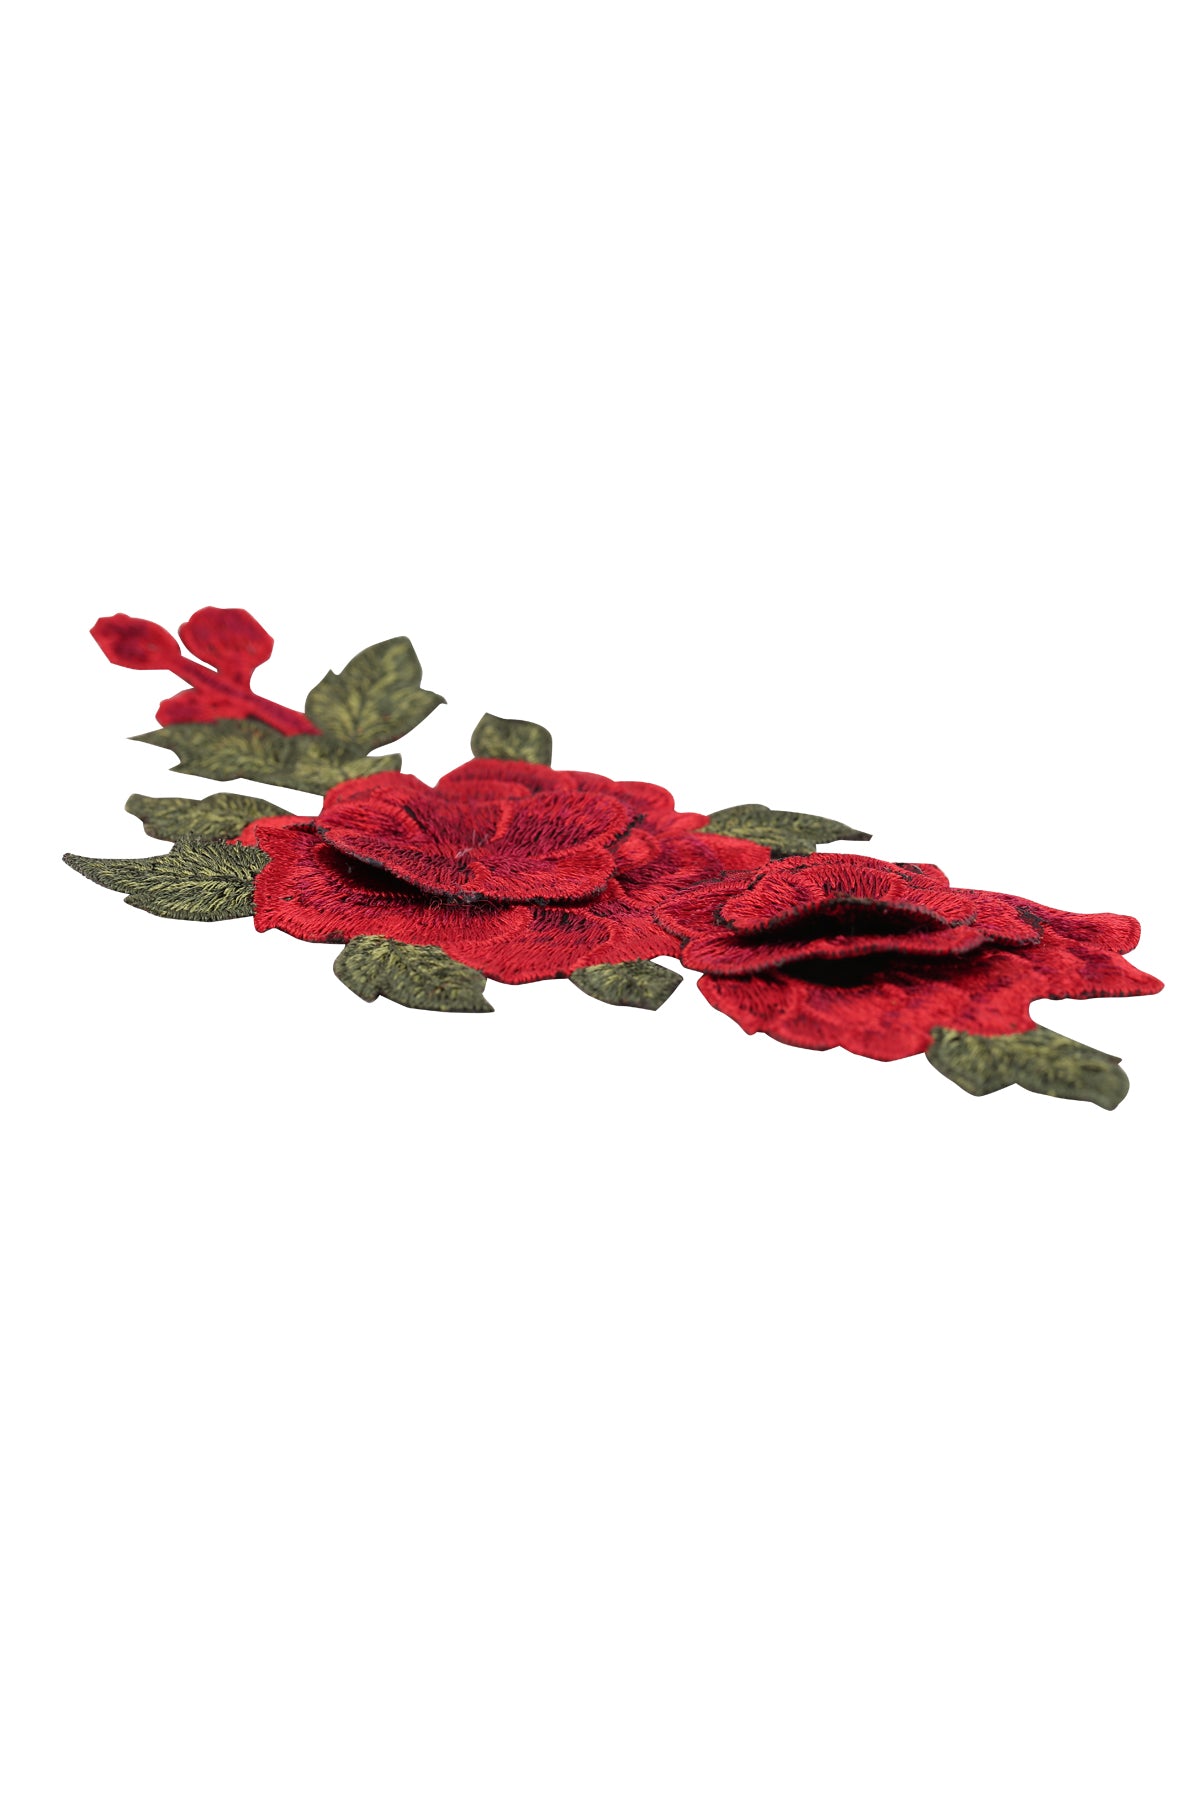 Red Flower Layered Embroidered Patch Applique